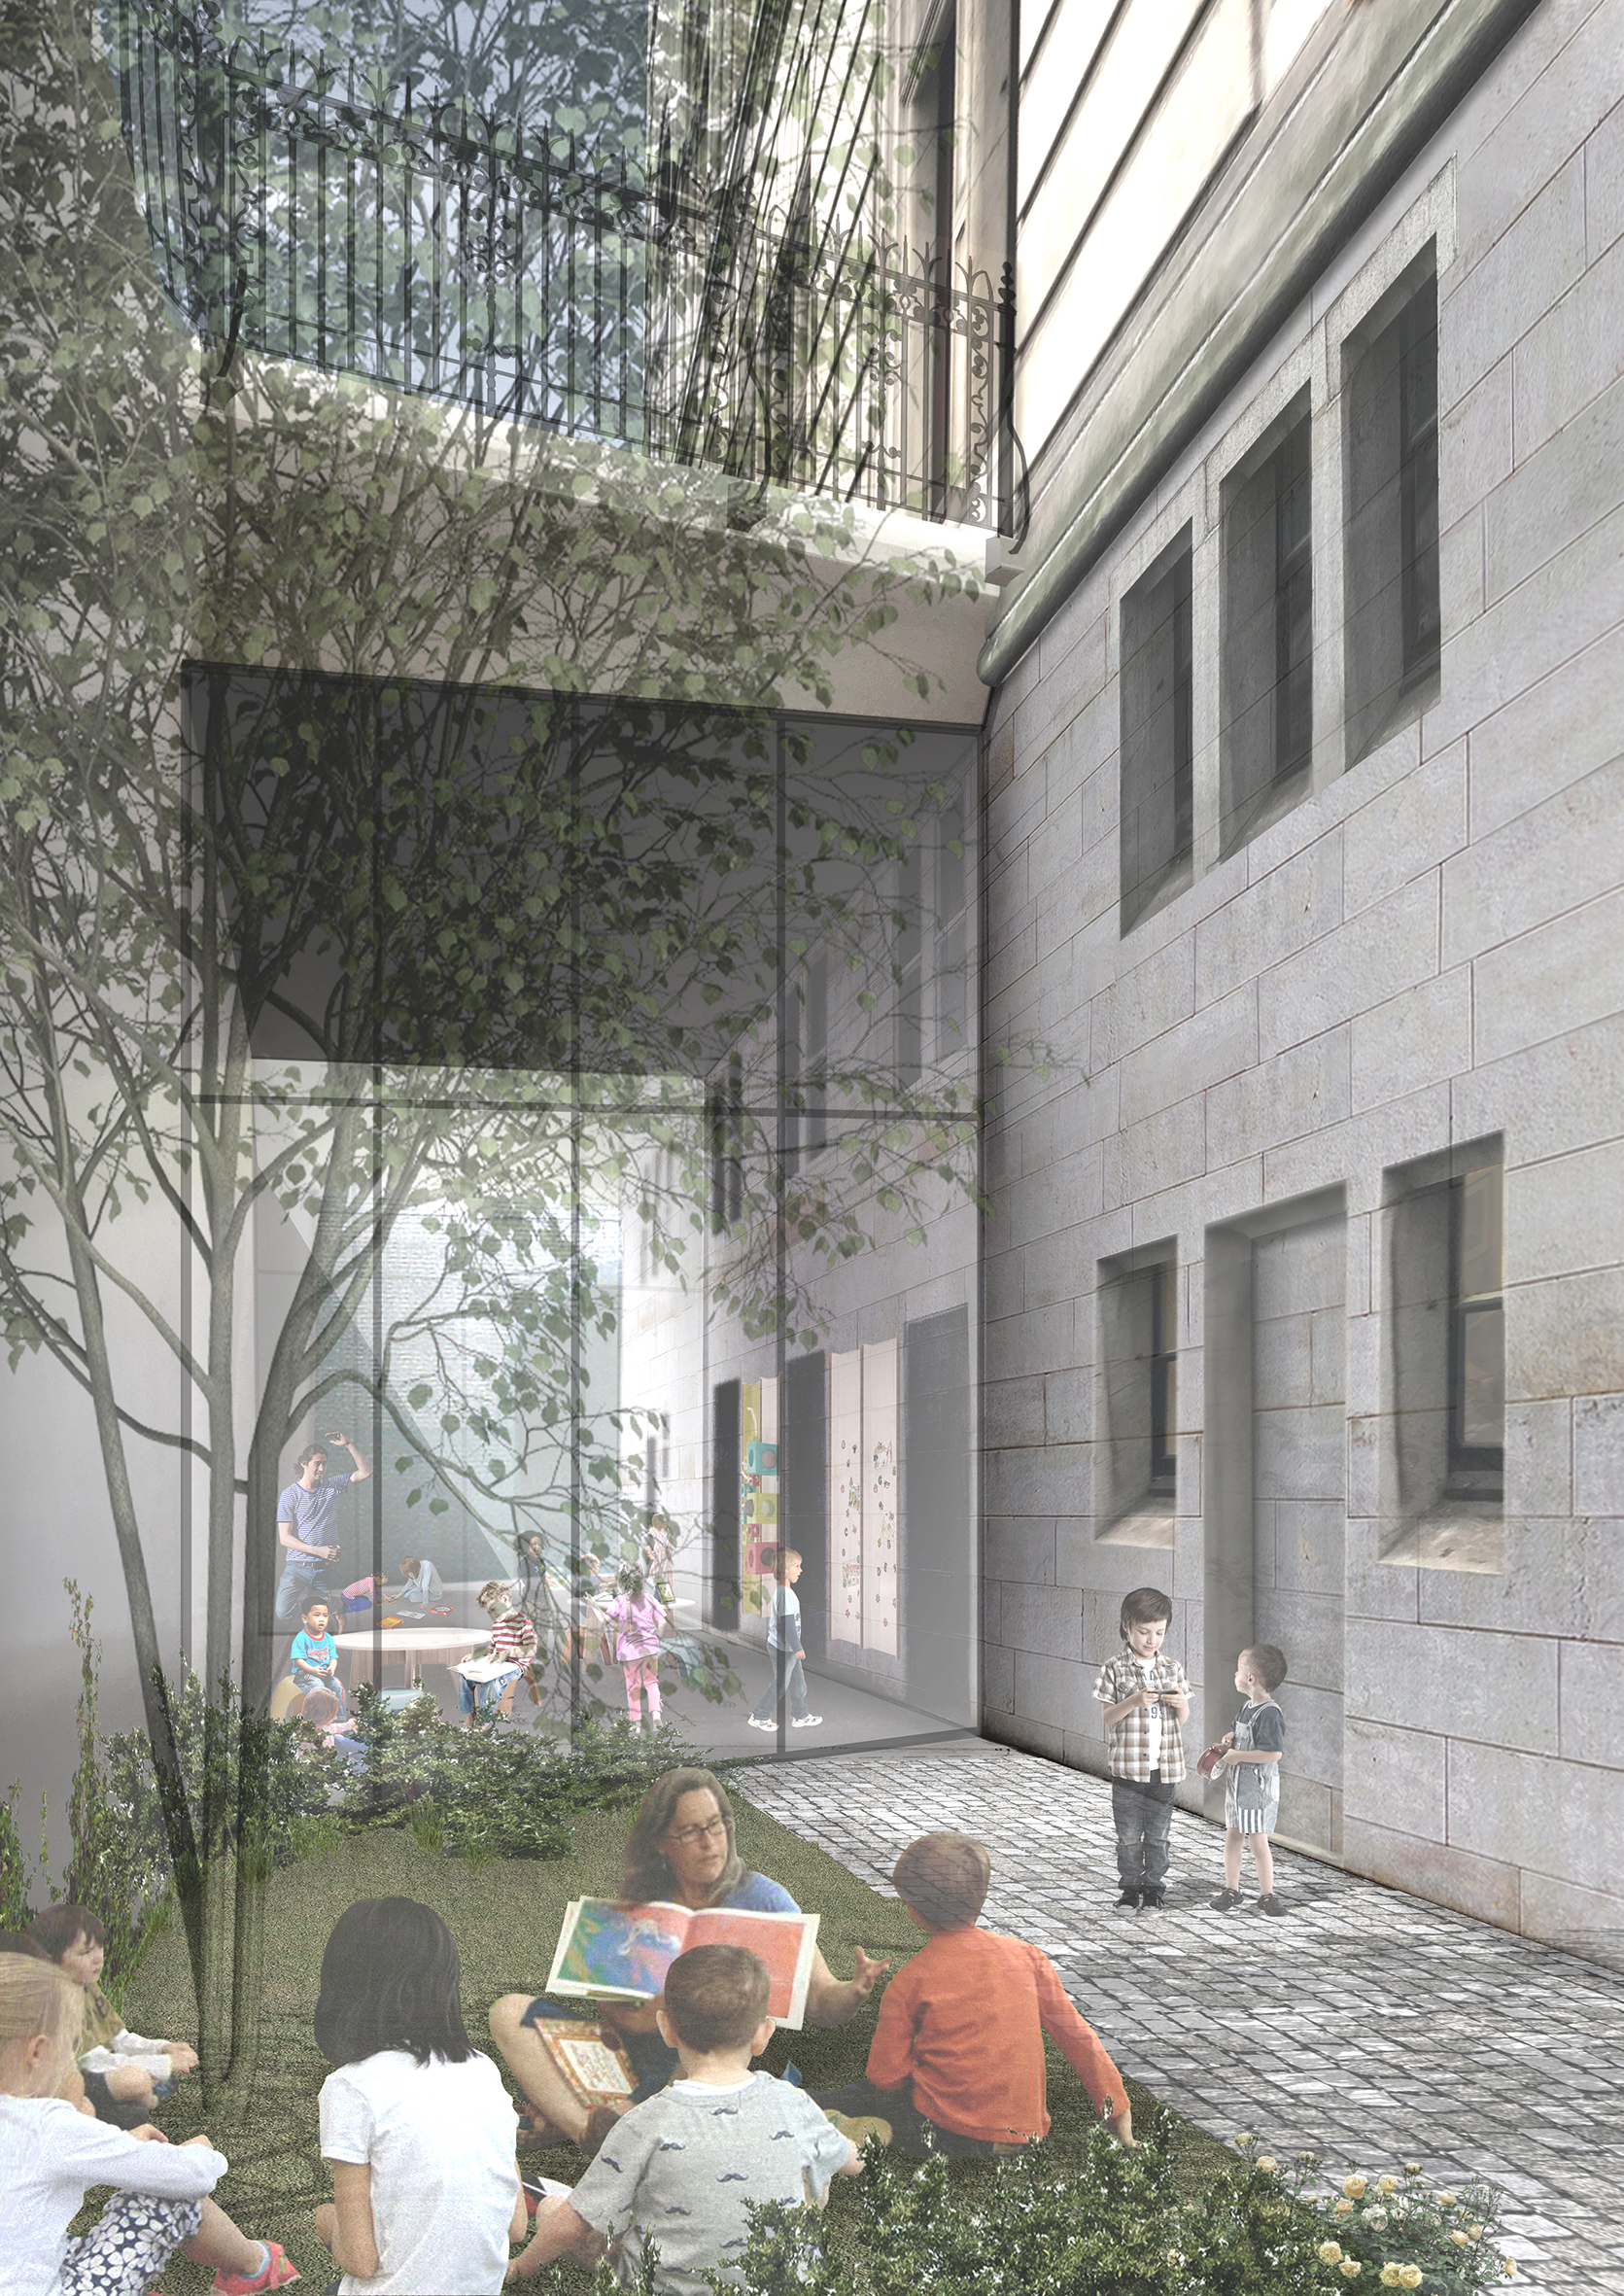 Plans to transform the learning centre at the National Portrait Gallery 